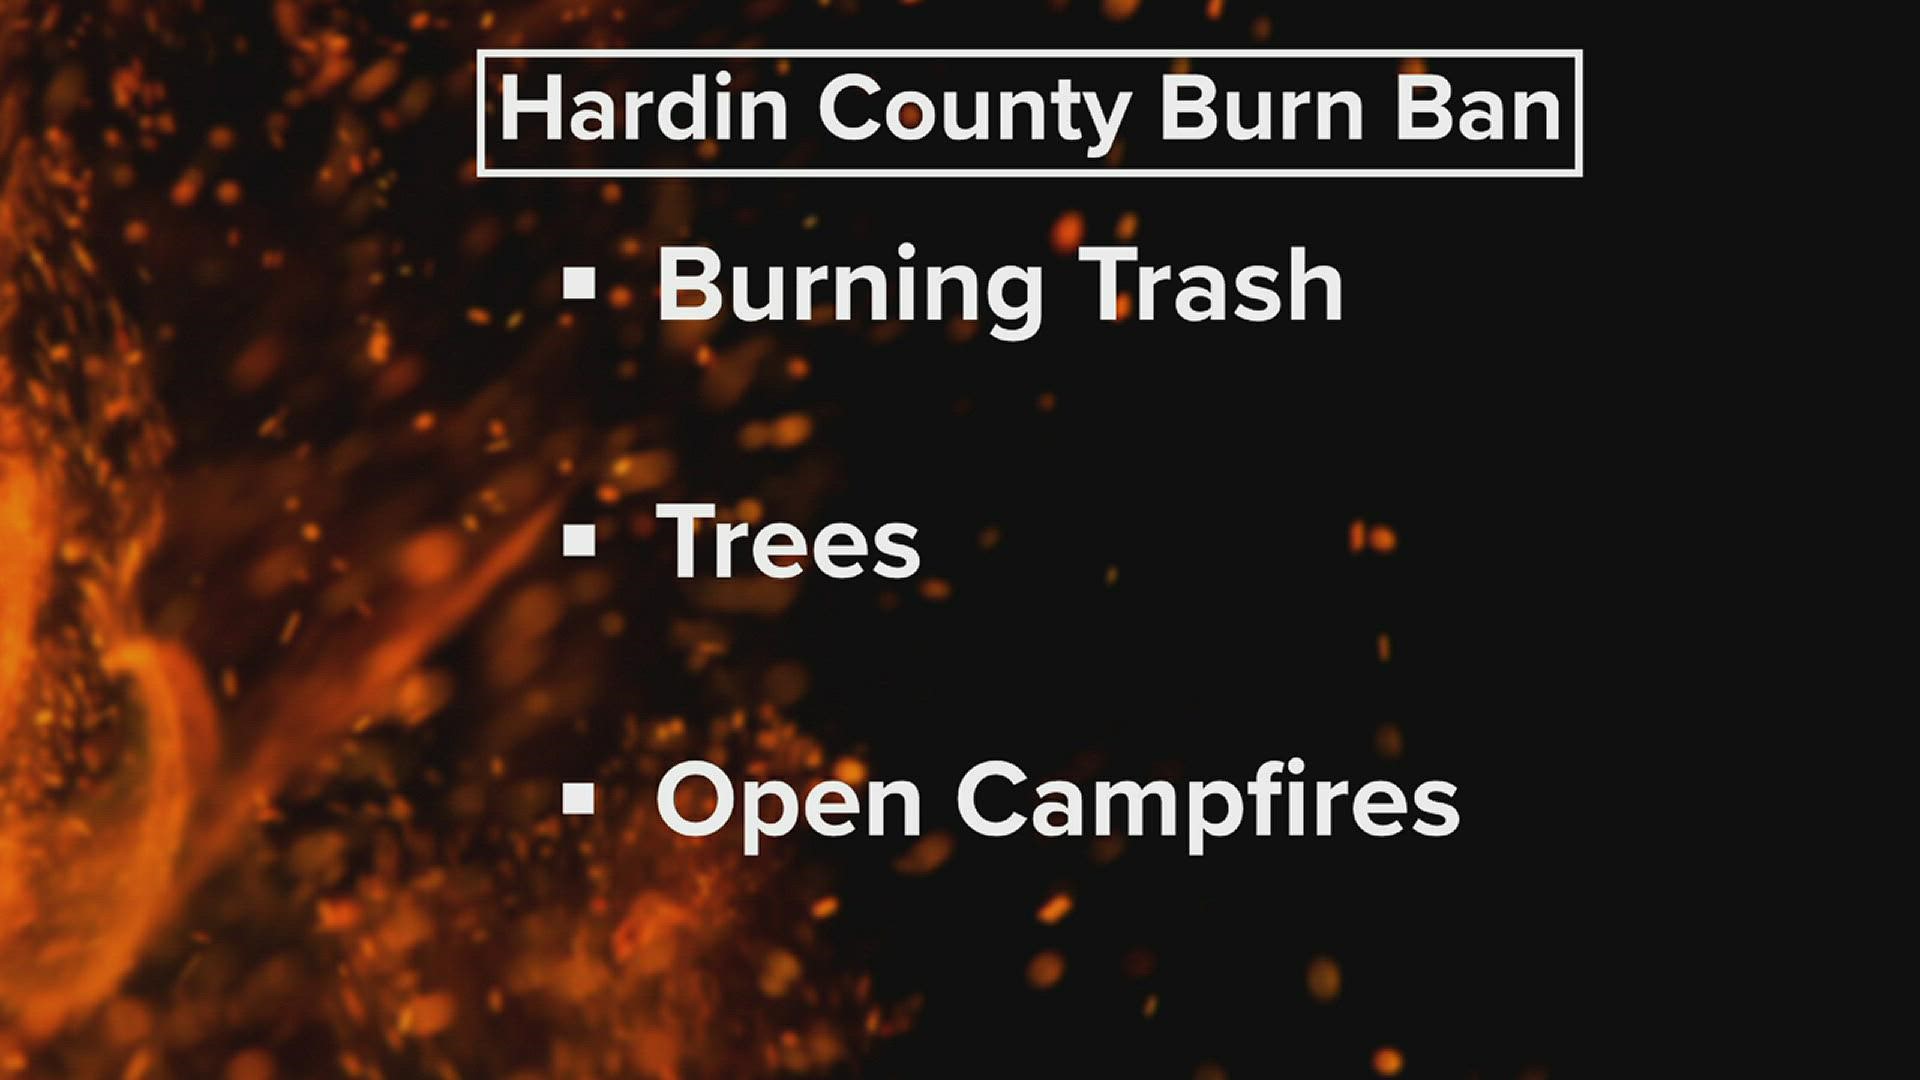 The Hardin County Commissioners Court met in regular session Tuesday and decided to extend the burn ban for 30 days, unless terminated sooner.